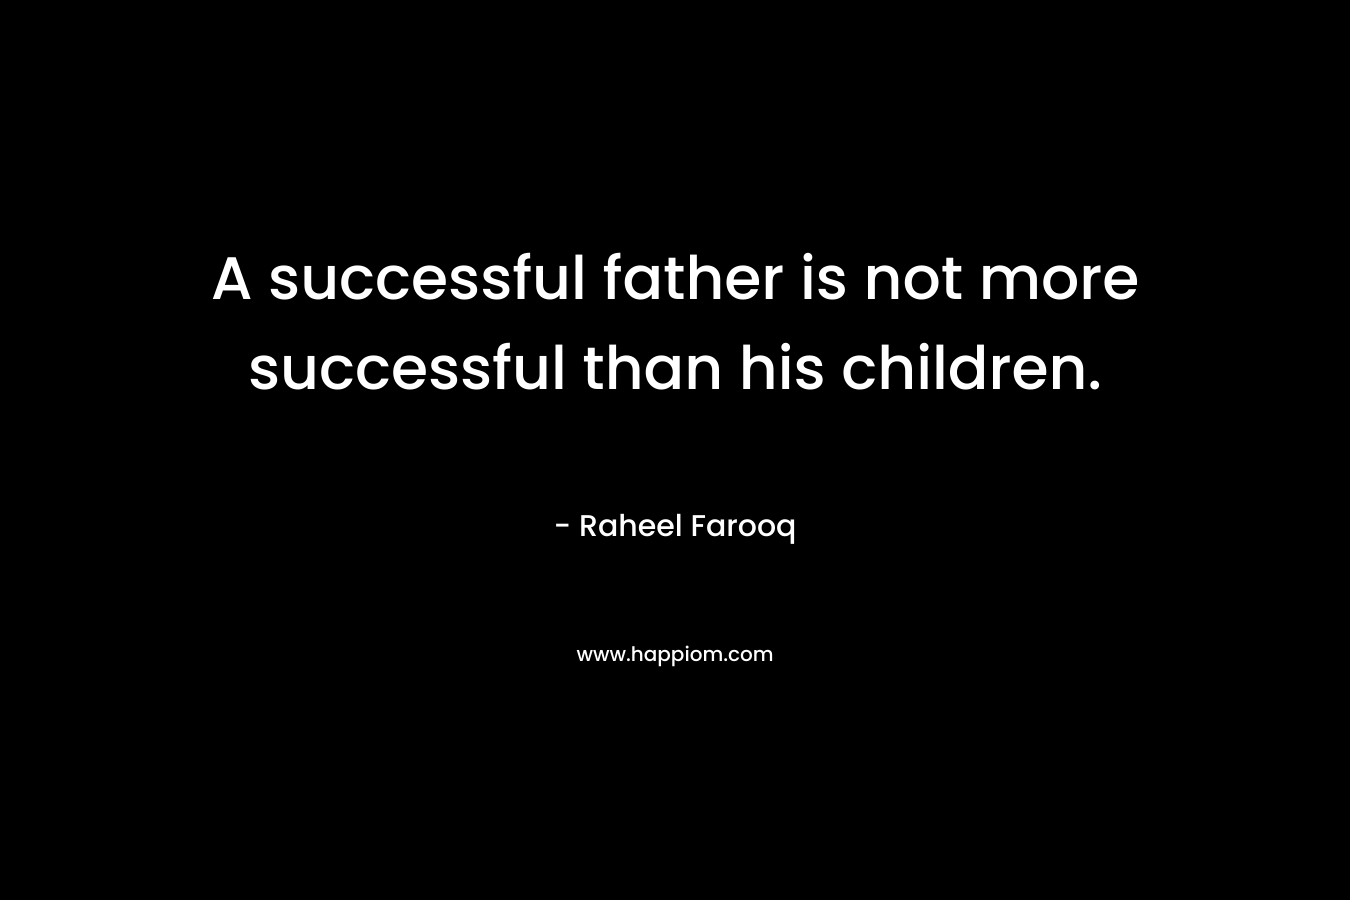 A successful father is not more successful than his children.